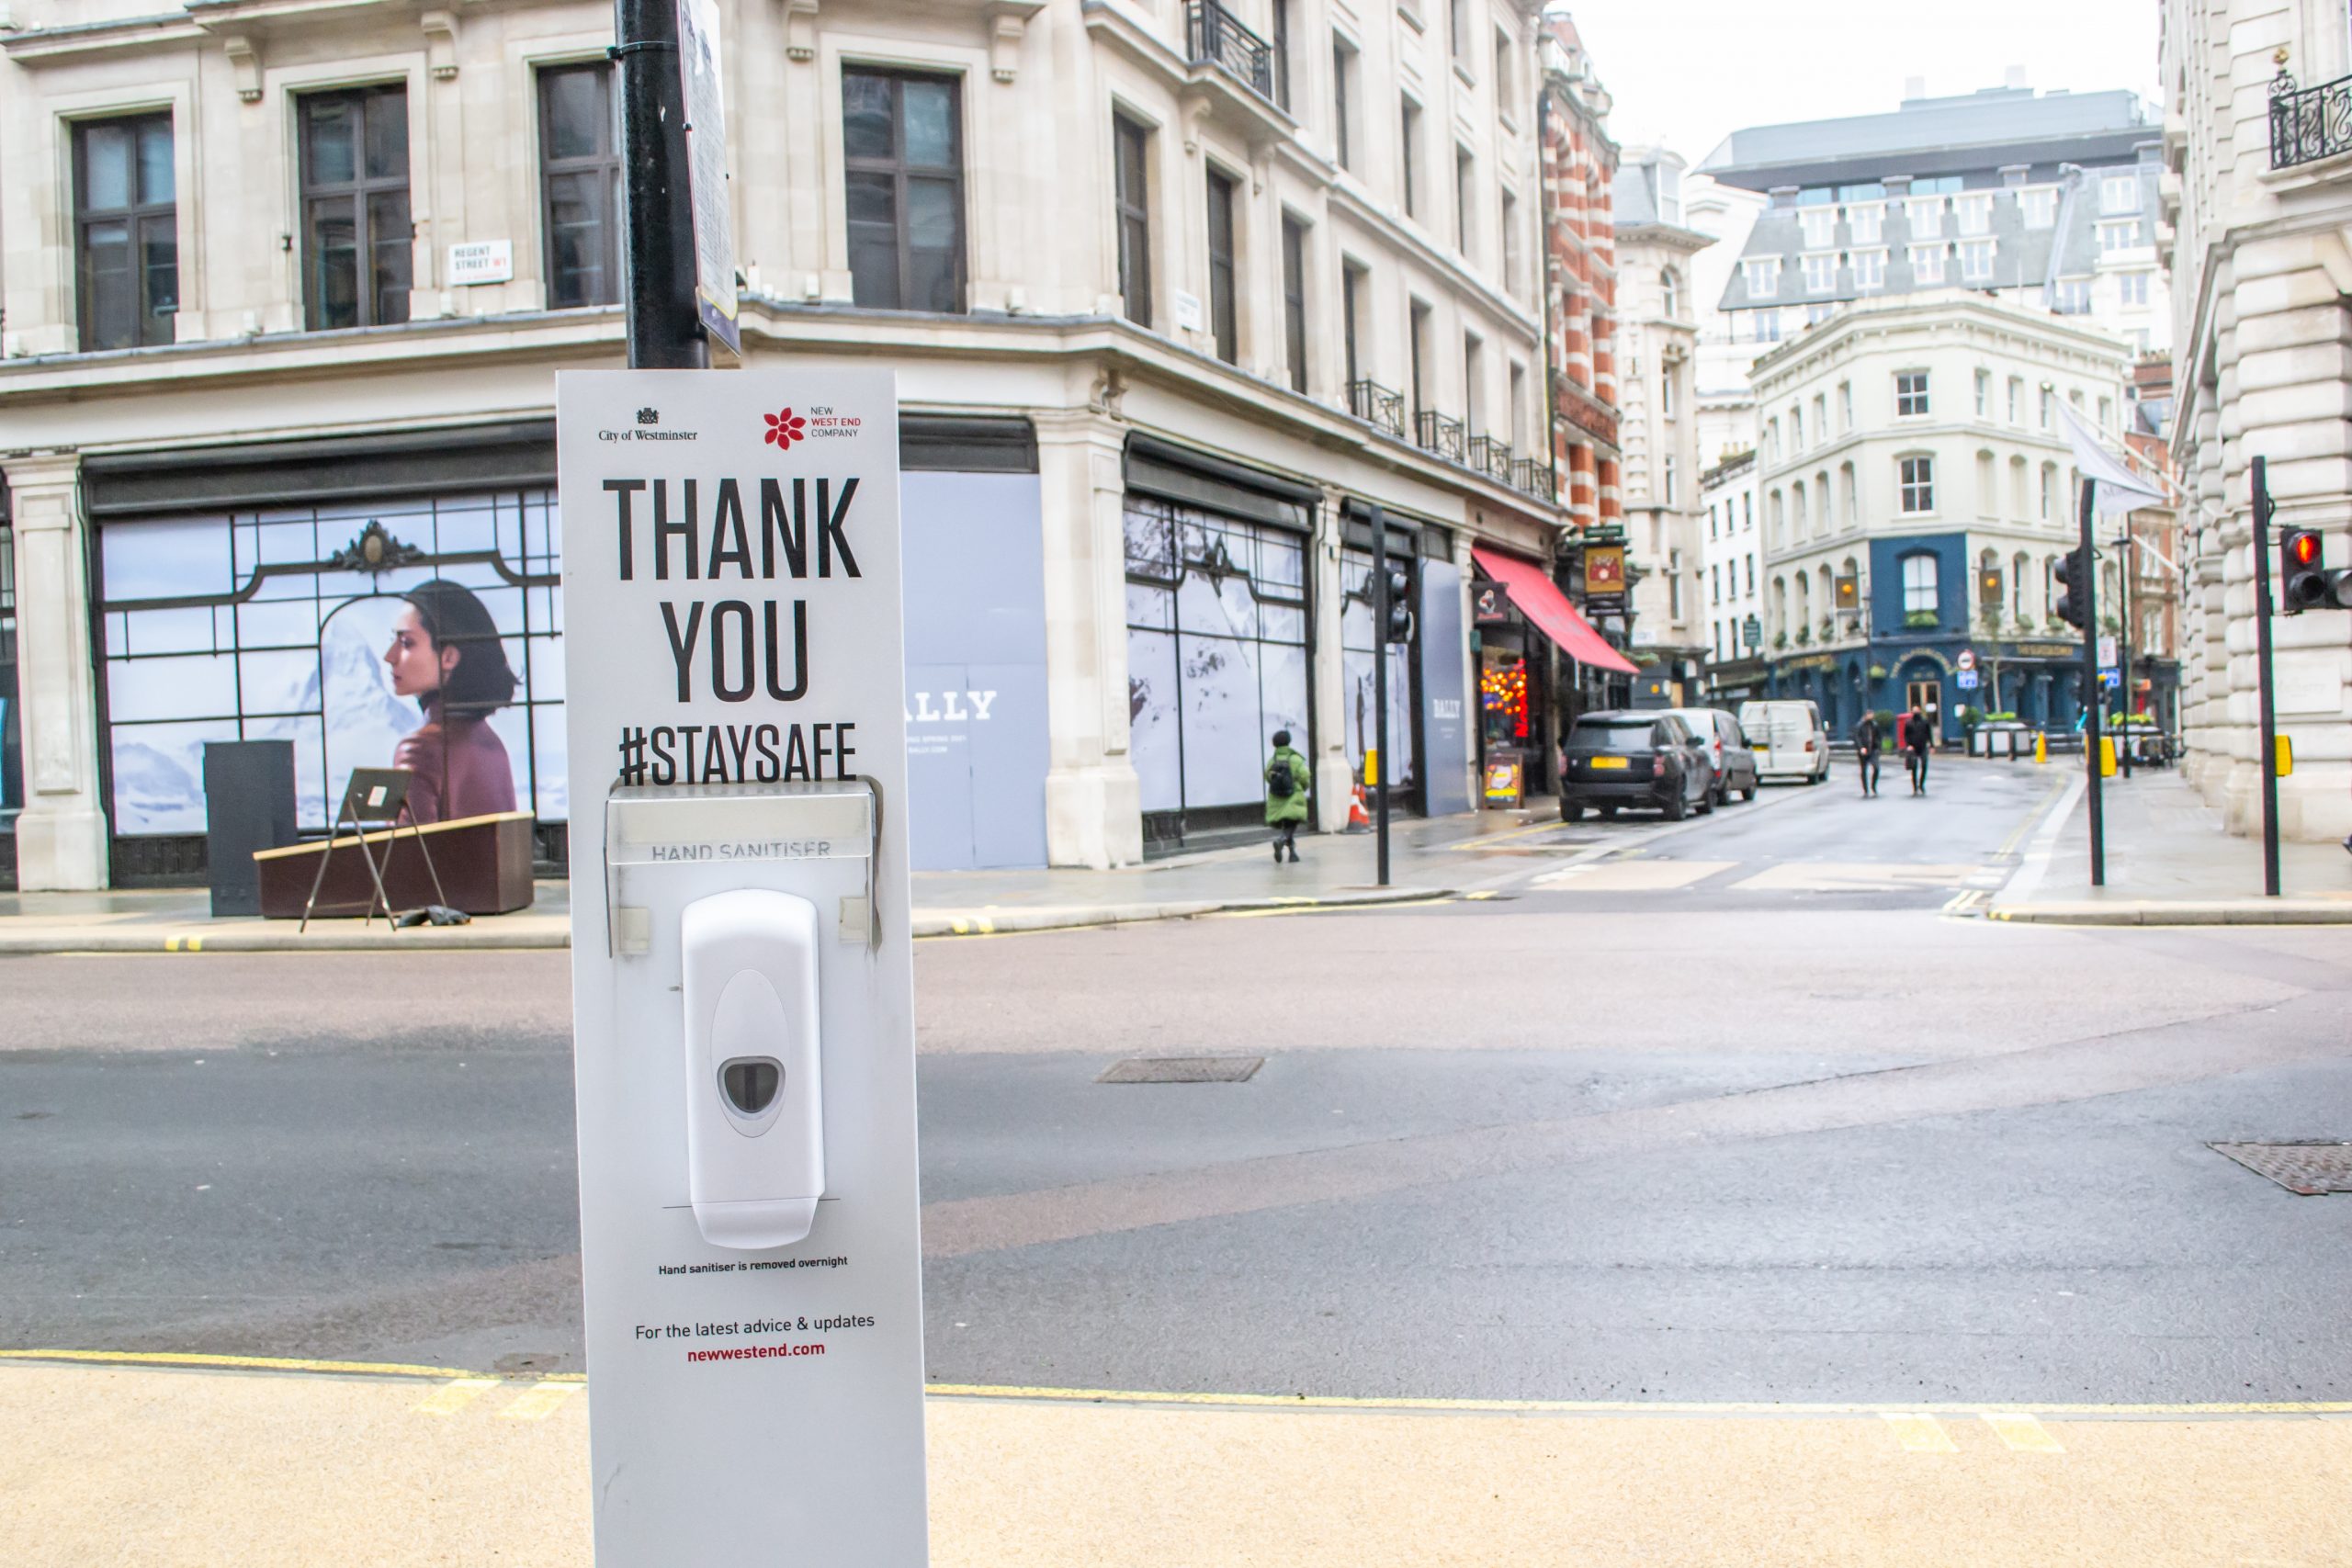 Rollout public hand sanitisers across town centres and high streets, says Retail NI